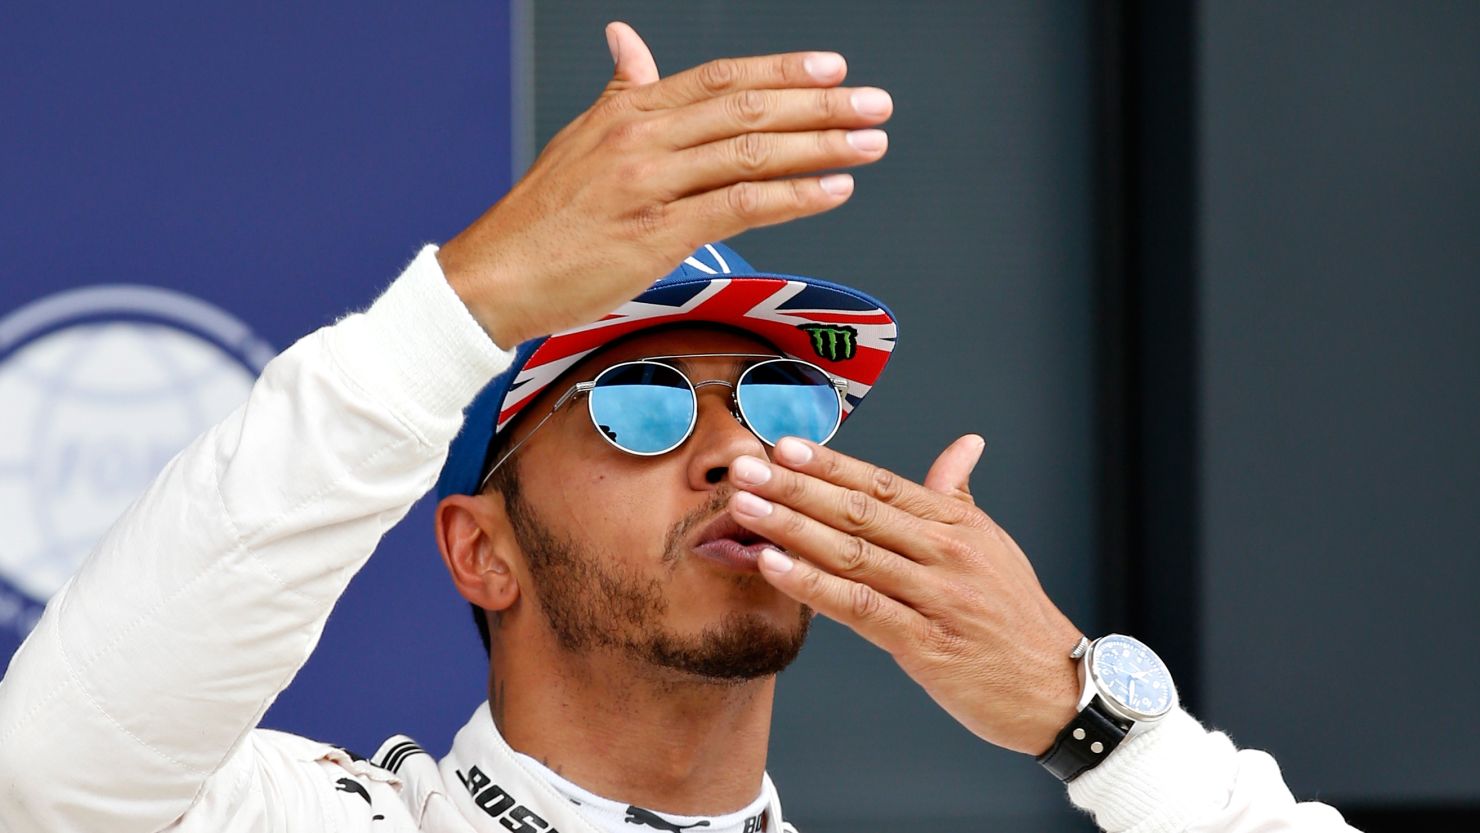 Lewis Hamilton of Great Britain blows kisses to the crowds after qualifying in pole position for Sunday's British Grand Prix at Silverstone.